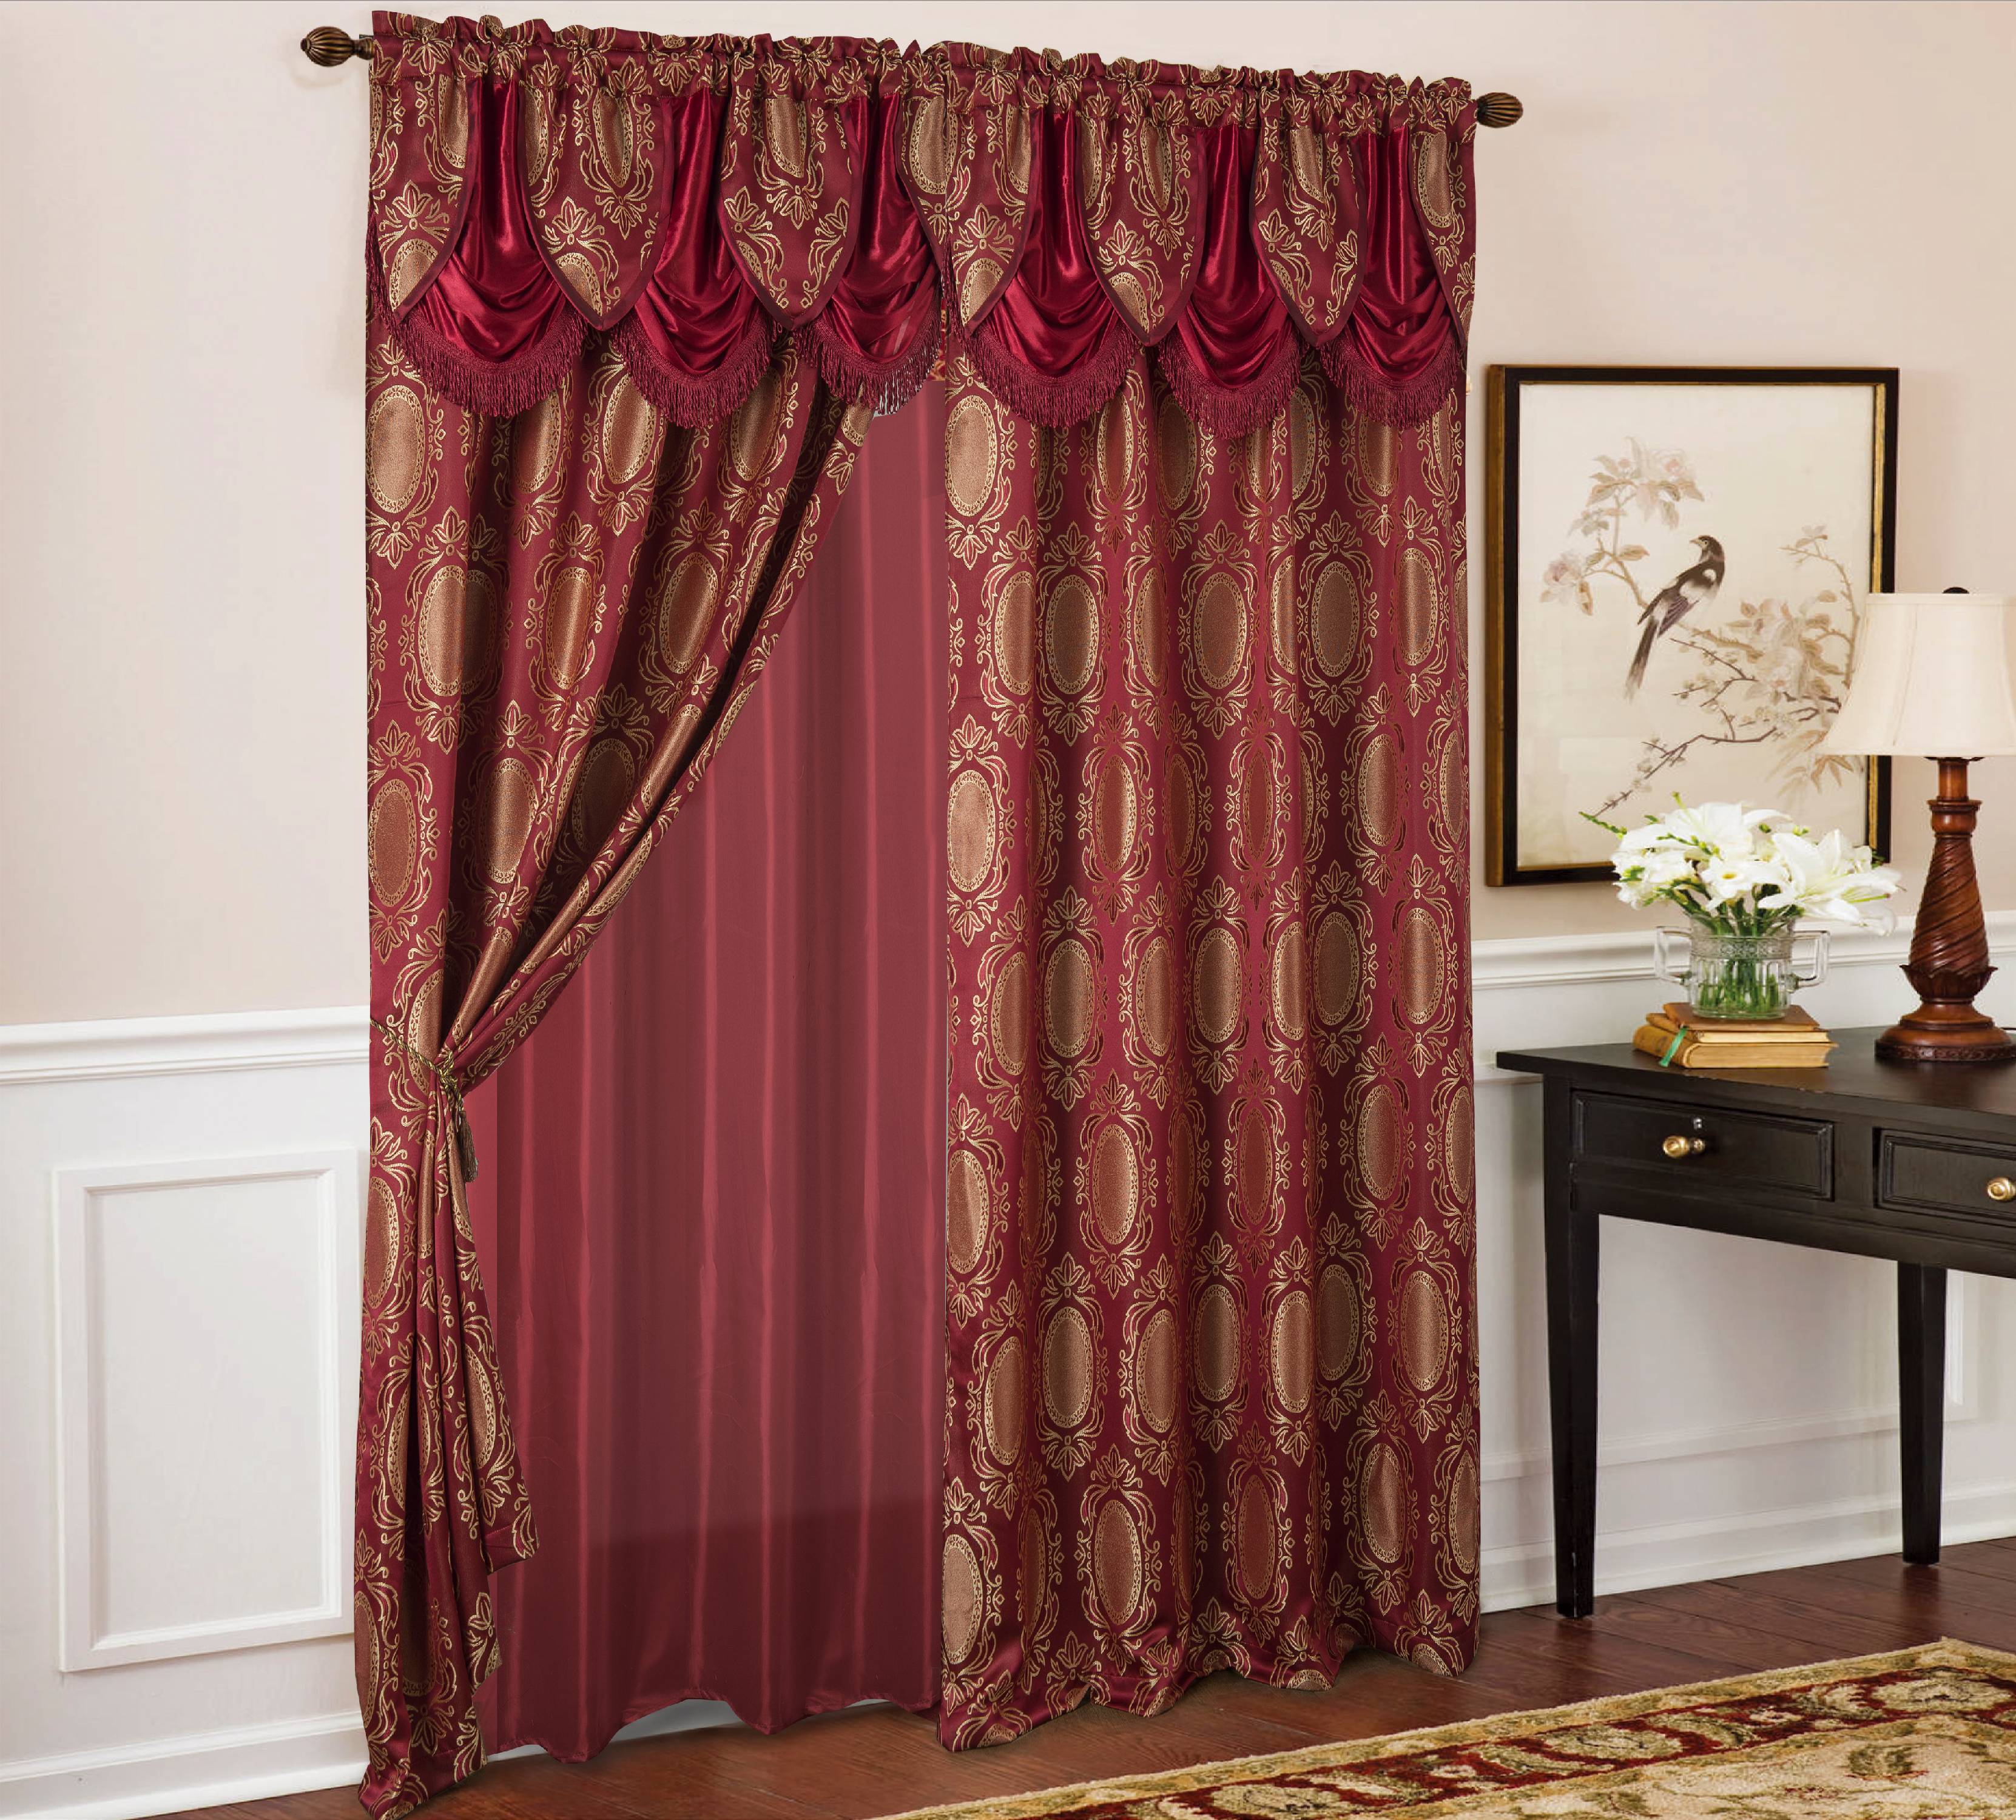 Kenyon Damask Textured Jacquard 54 x 84 in. Single Rod Pocket Curtain Panel w/Attached 18 in. Valance - Linen Universe Co.